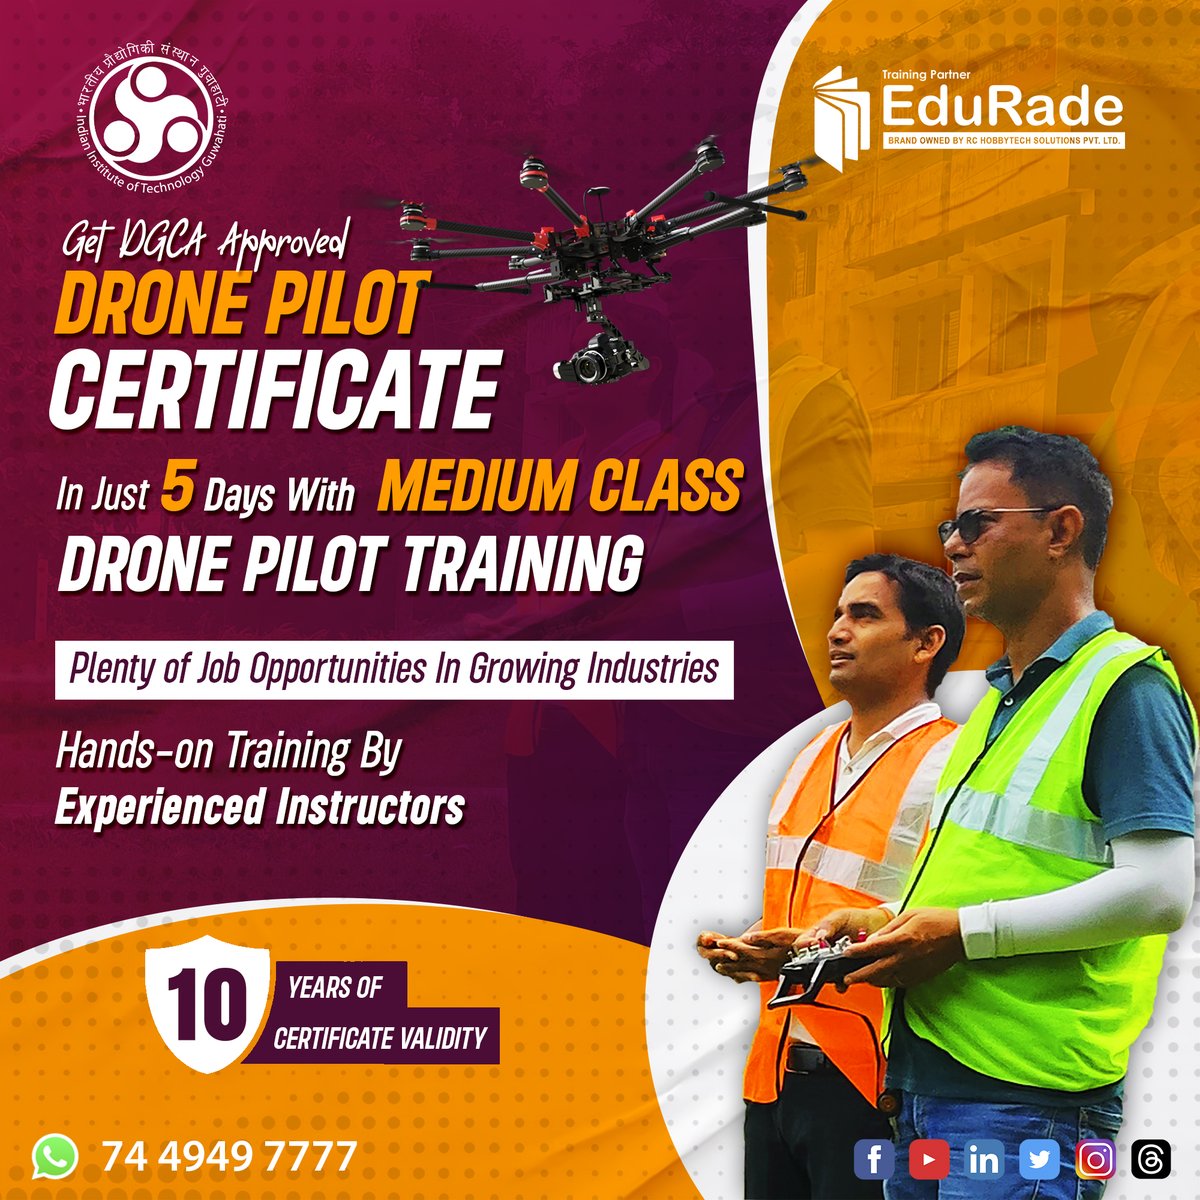 Embark on a thrilling drone pilot career with EduRade's 5-day Medium Class Drone Pilot Training!

Earn your DGCA Approved Drone Pilot Certificate and explore abundant job opportunities.

Enroll now for a promising future in the drone industry!
📲 74494 97777

#DronePilot